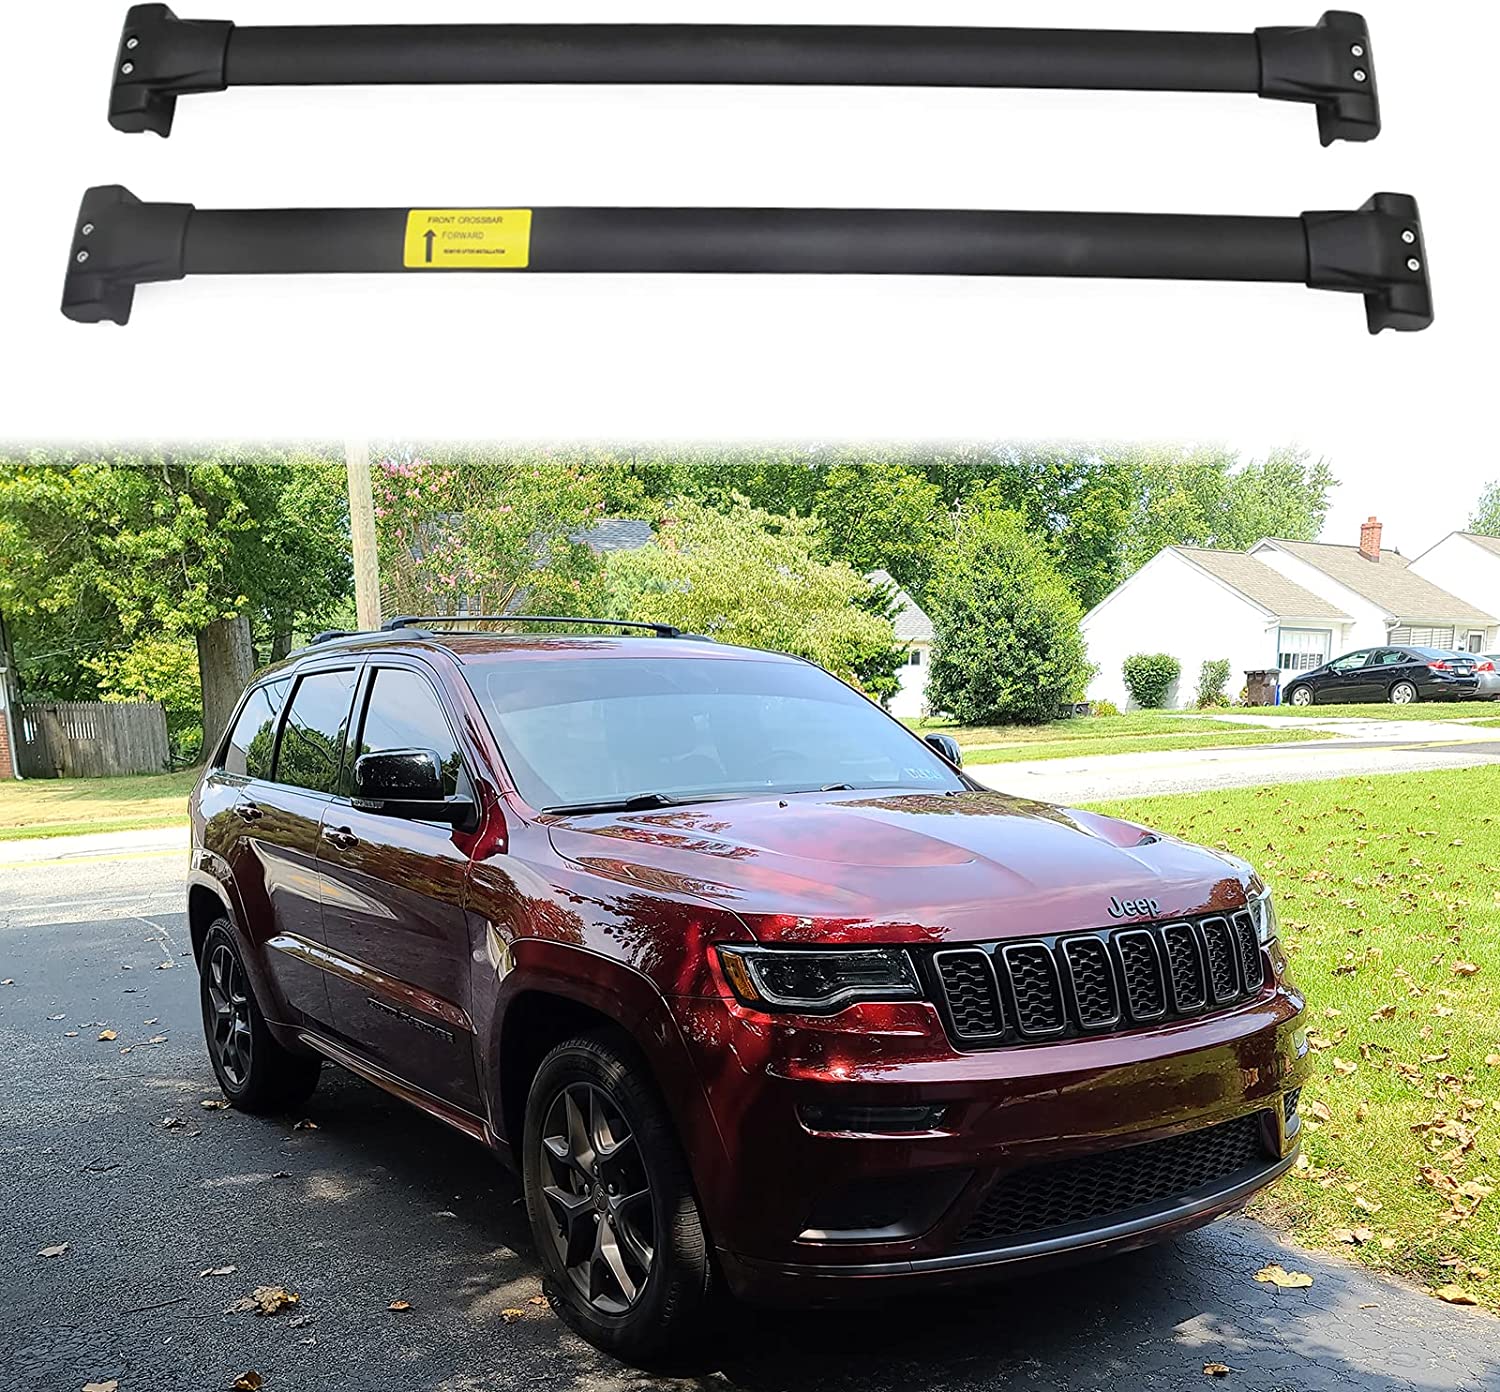 Folding Wheelchair Rack for Car {Best Rated}